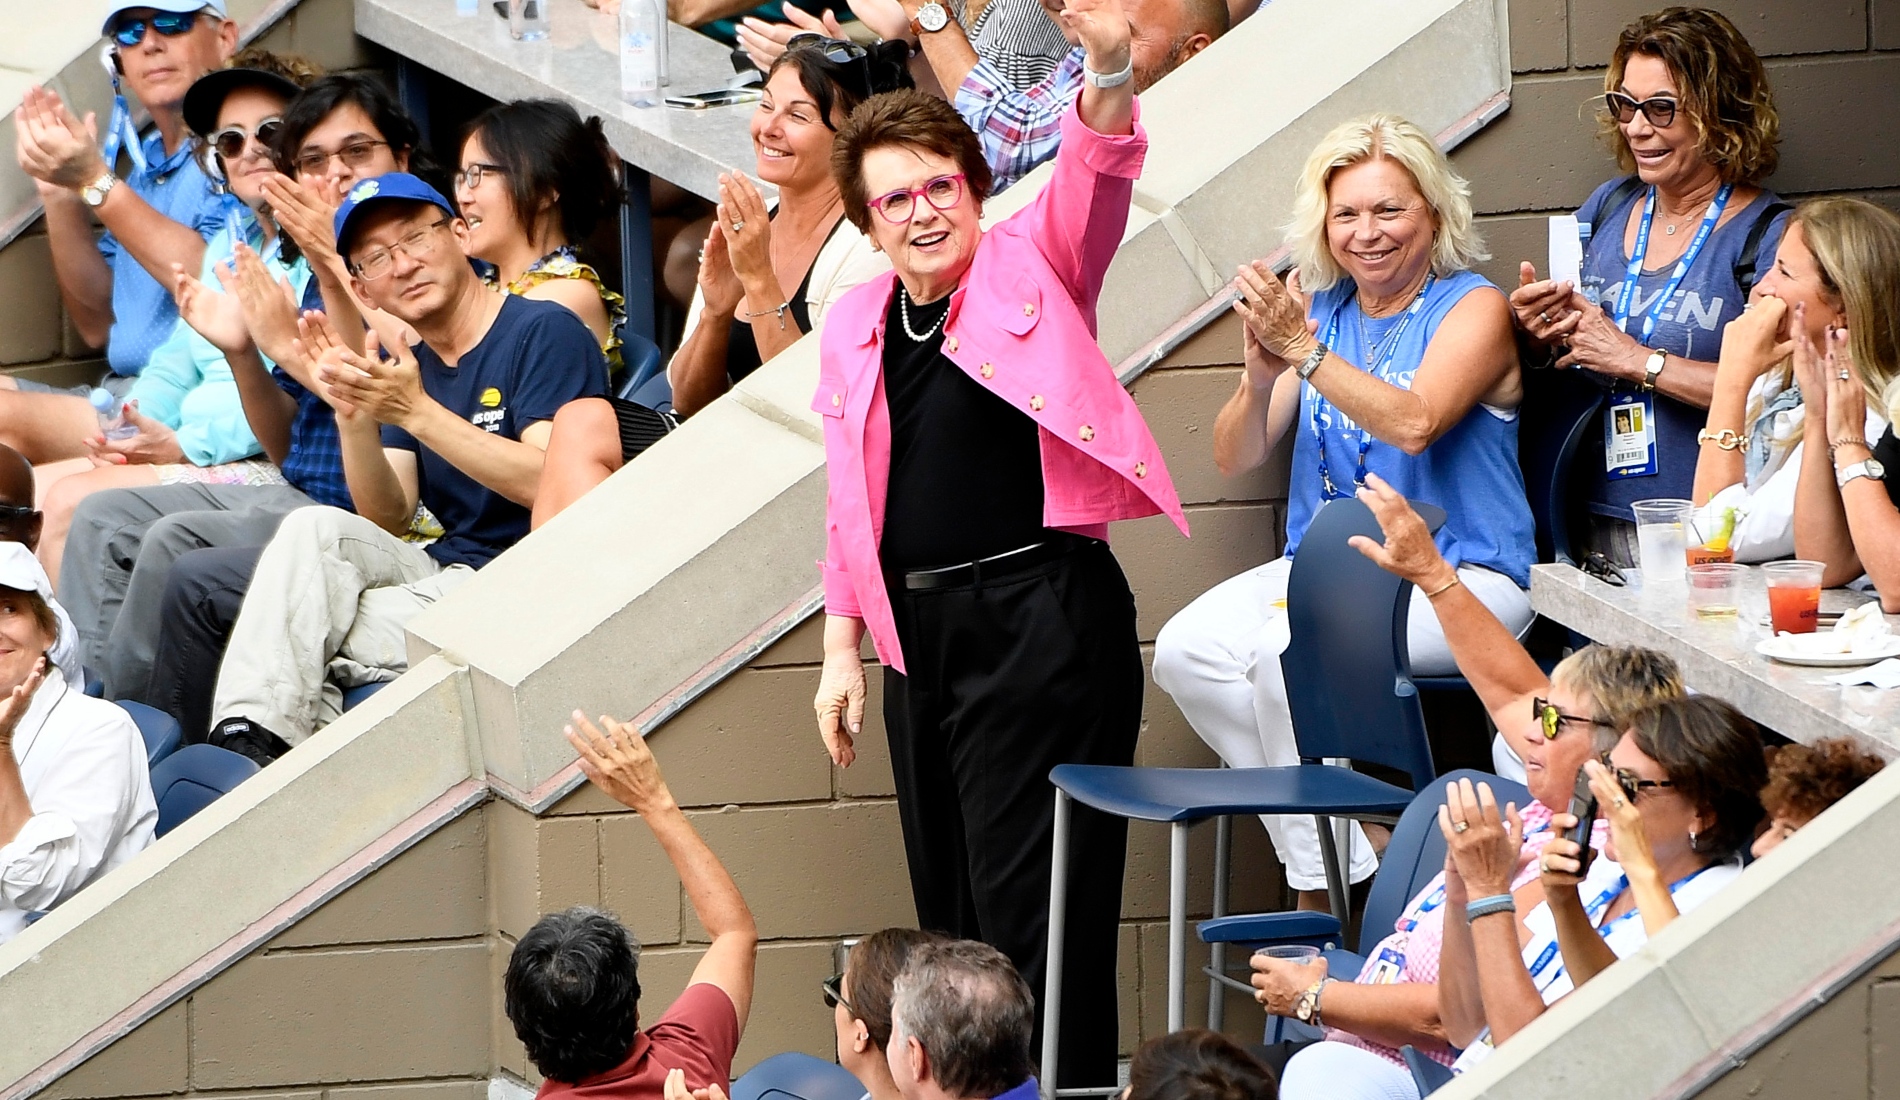 Billie Jean King at the 2019 US Open